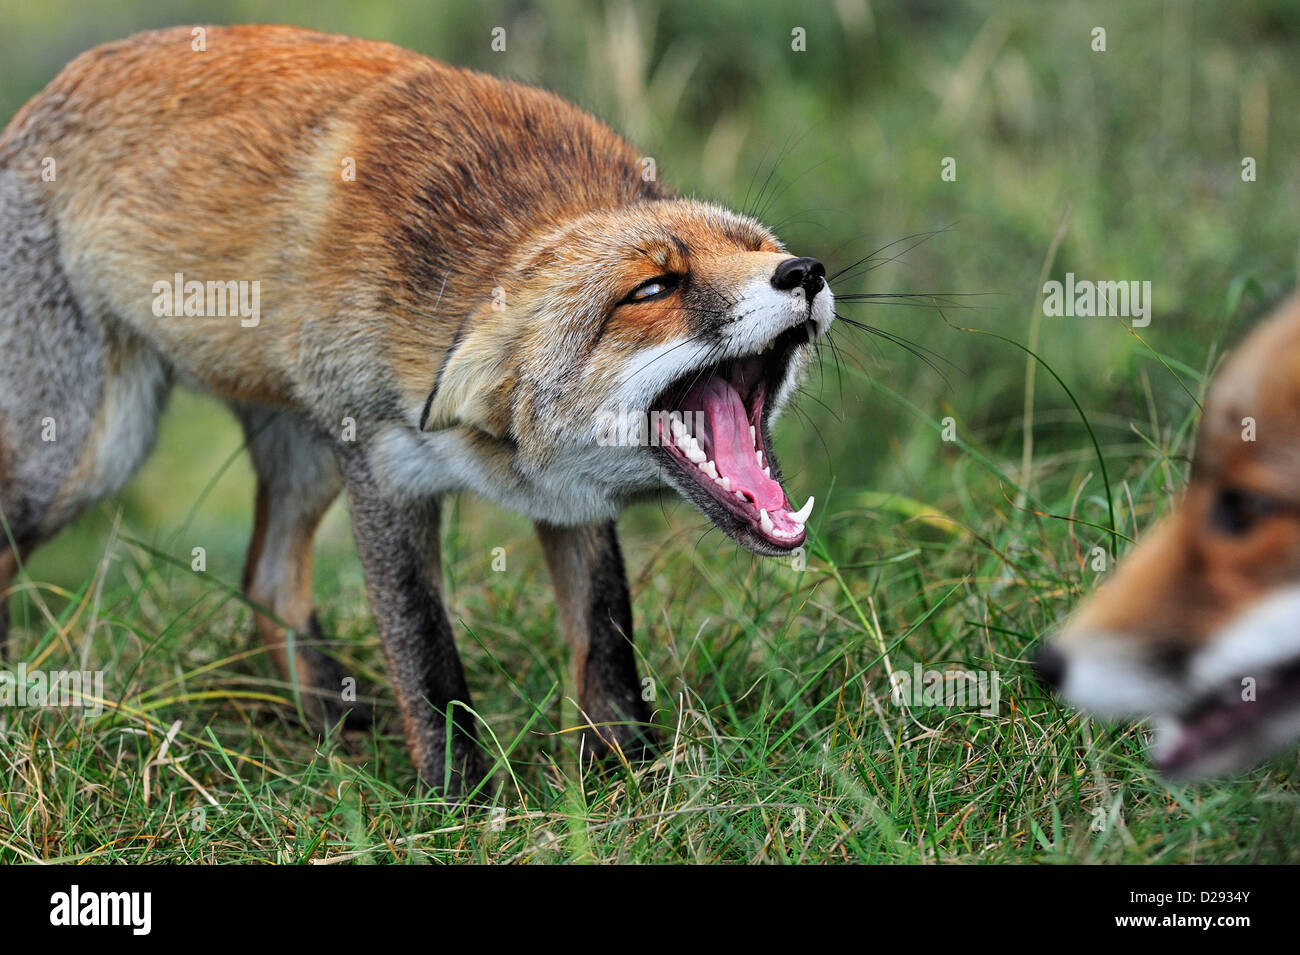 Scared and aggressive, subordinate Red fox (Vulpes vulpes) in defensive posture showing teeth and keeping ears flat in meadow Stock Photo